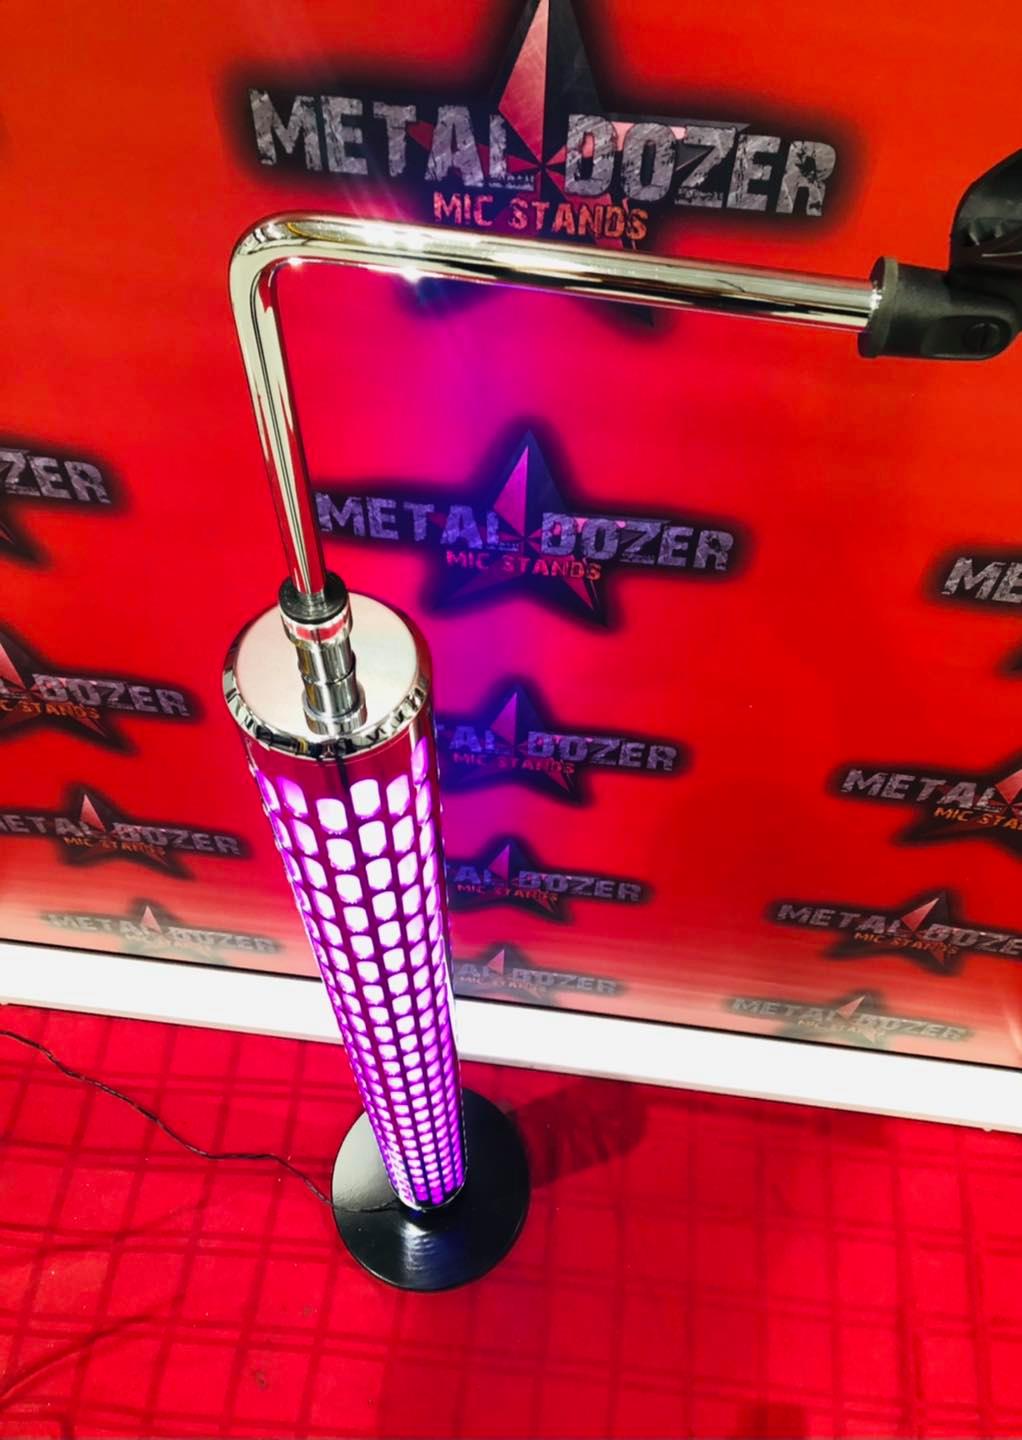 ZZ Top Tribute mic stand with LEDs from MetalDozer